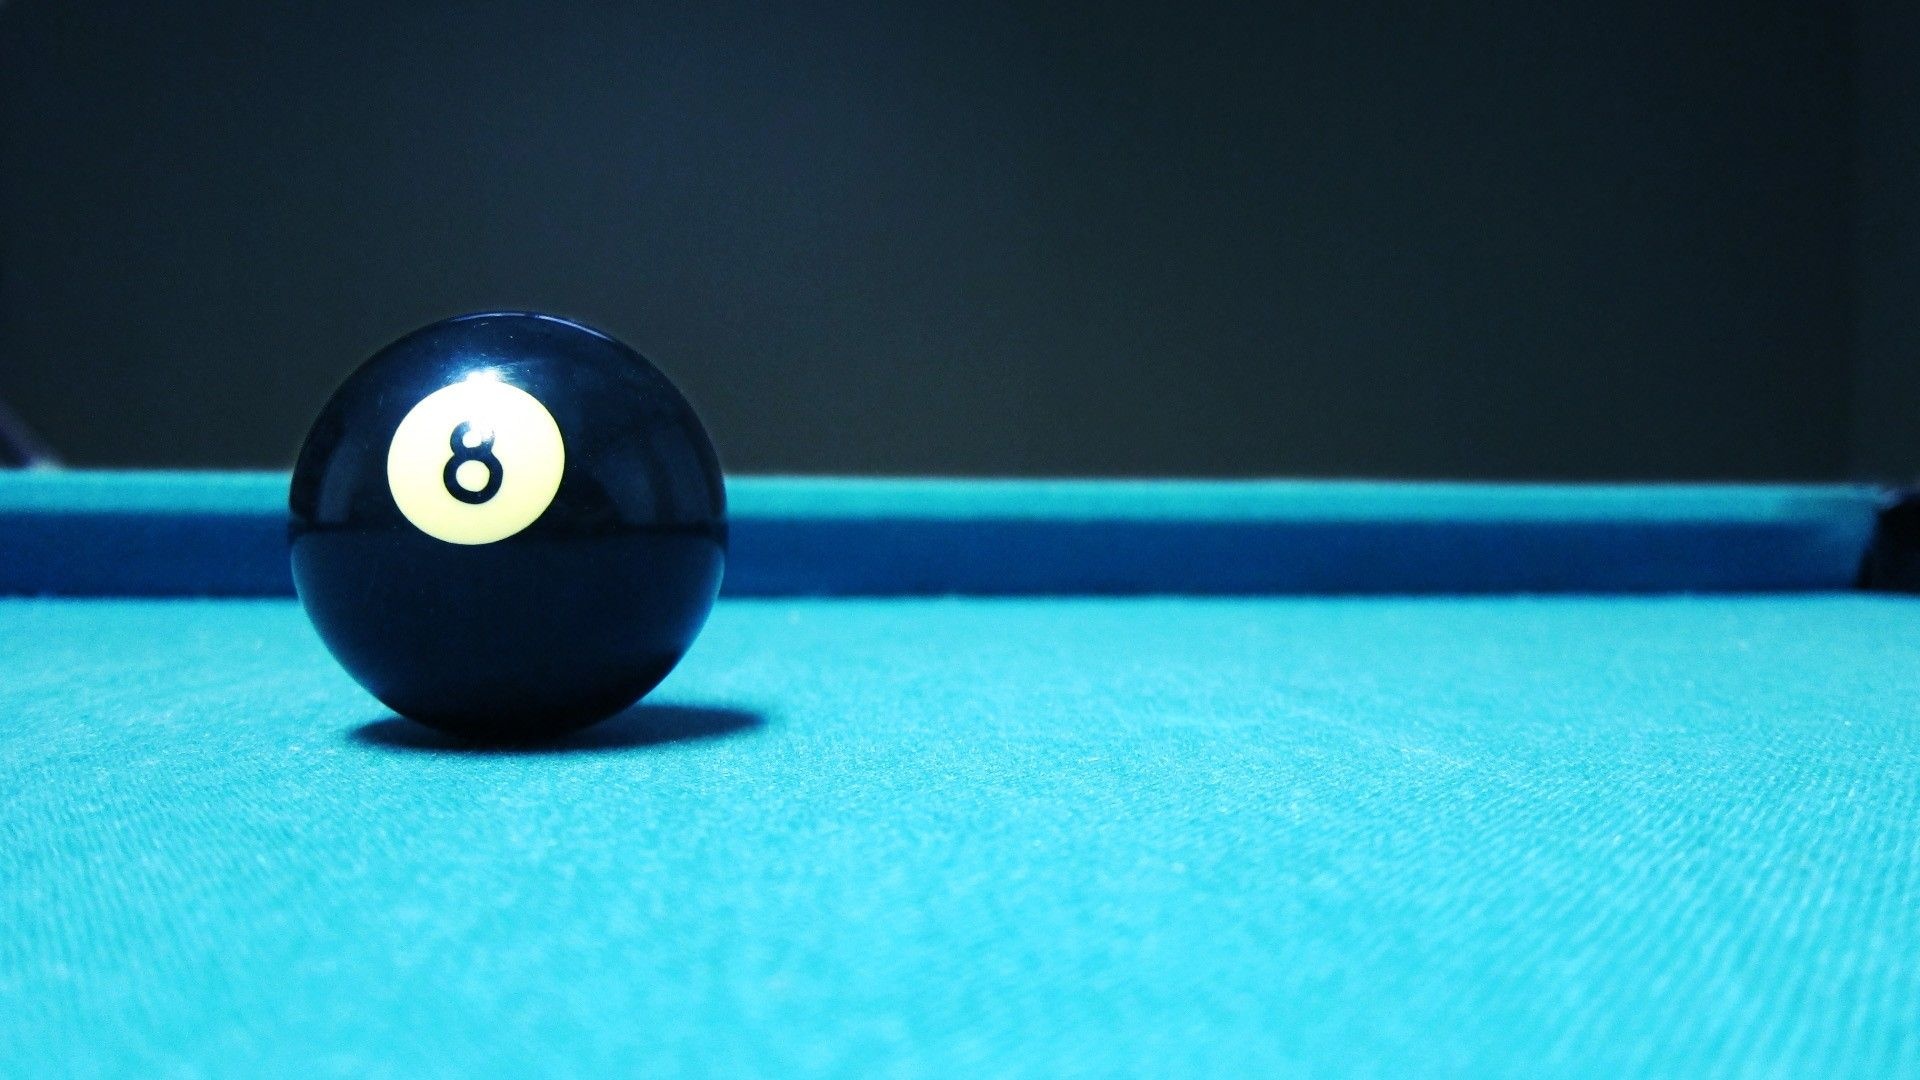 Cue Sports: The solid black billiard ball, The symbol of the eight-ball pool game. 1920x1080 Full HD Wallpaper.